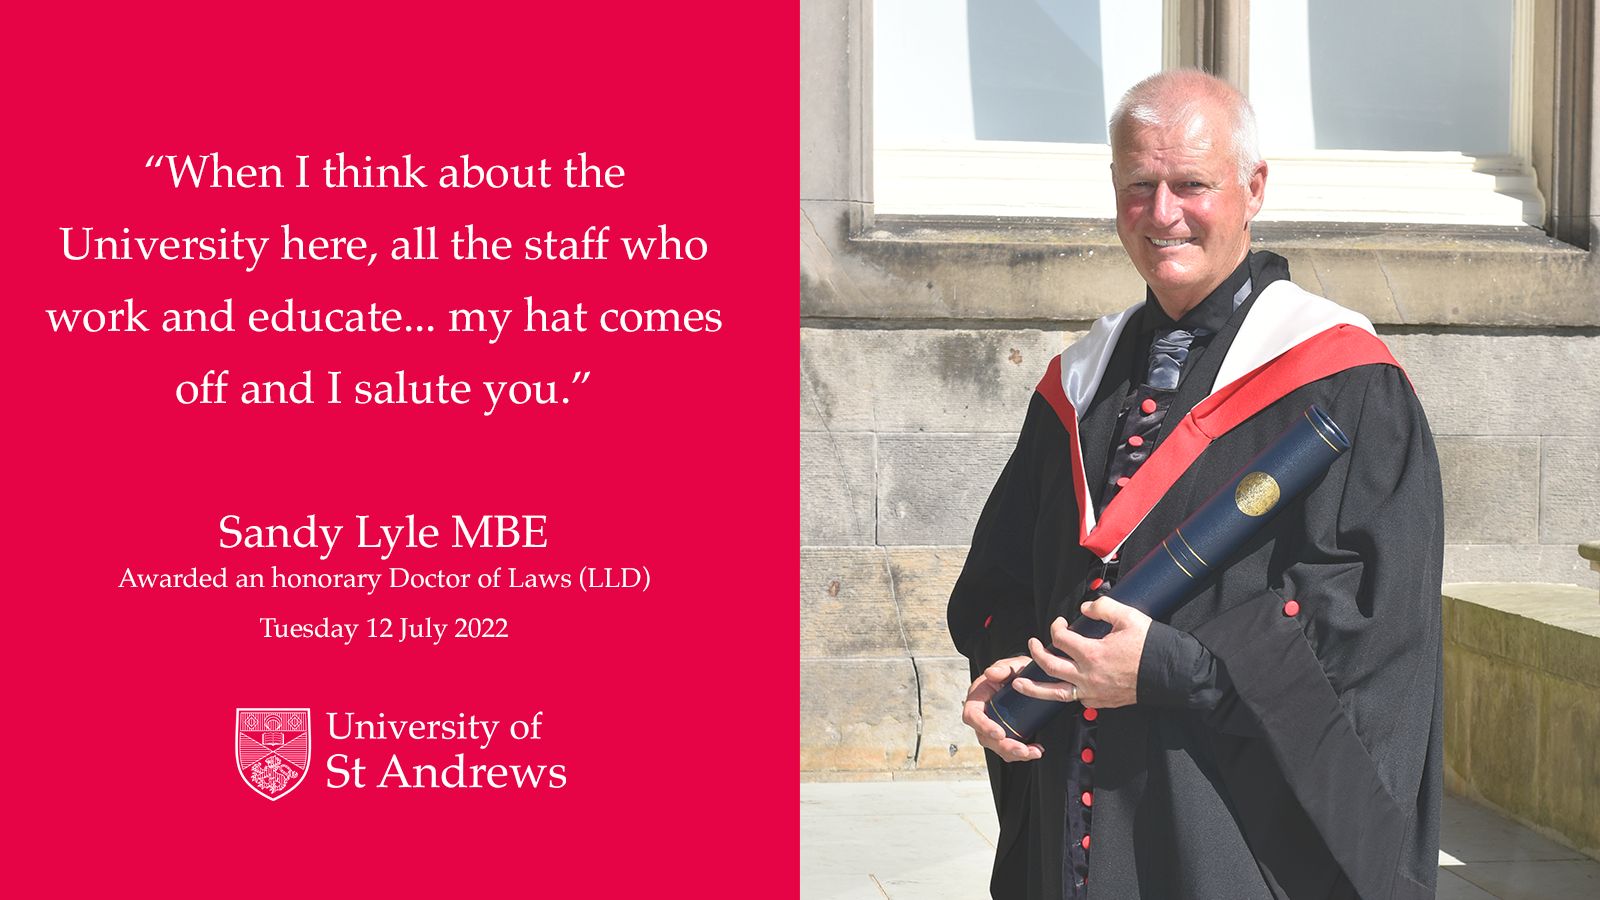 Sandy Lyle in academic gown, receiving his honorary degree. Quote reads: When I think about the University here, all the staff who work and educate...my hat comes off and I salute you.